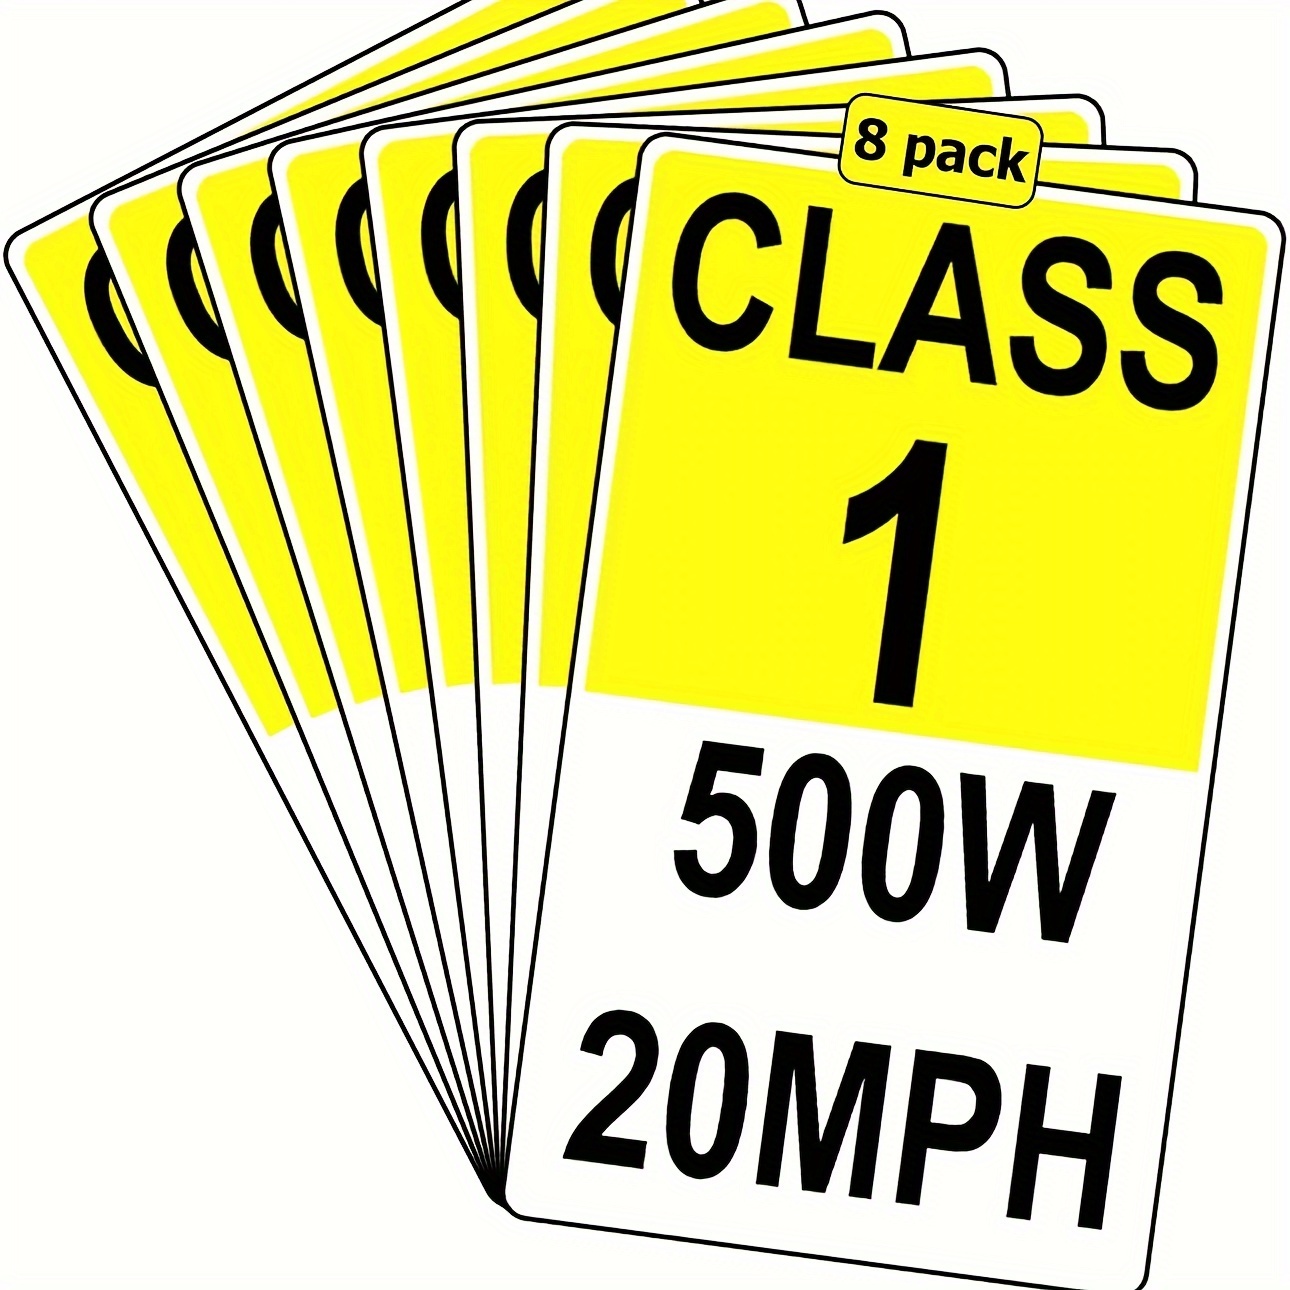 

8pcs Electric Bicycle Frame Identification Class Number Stickers Decals 2x3.5inch E-bike Class Number Signs Mark Weatherproof, Class 1 500w 20mph